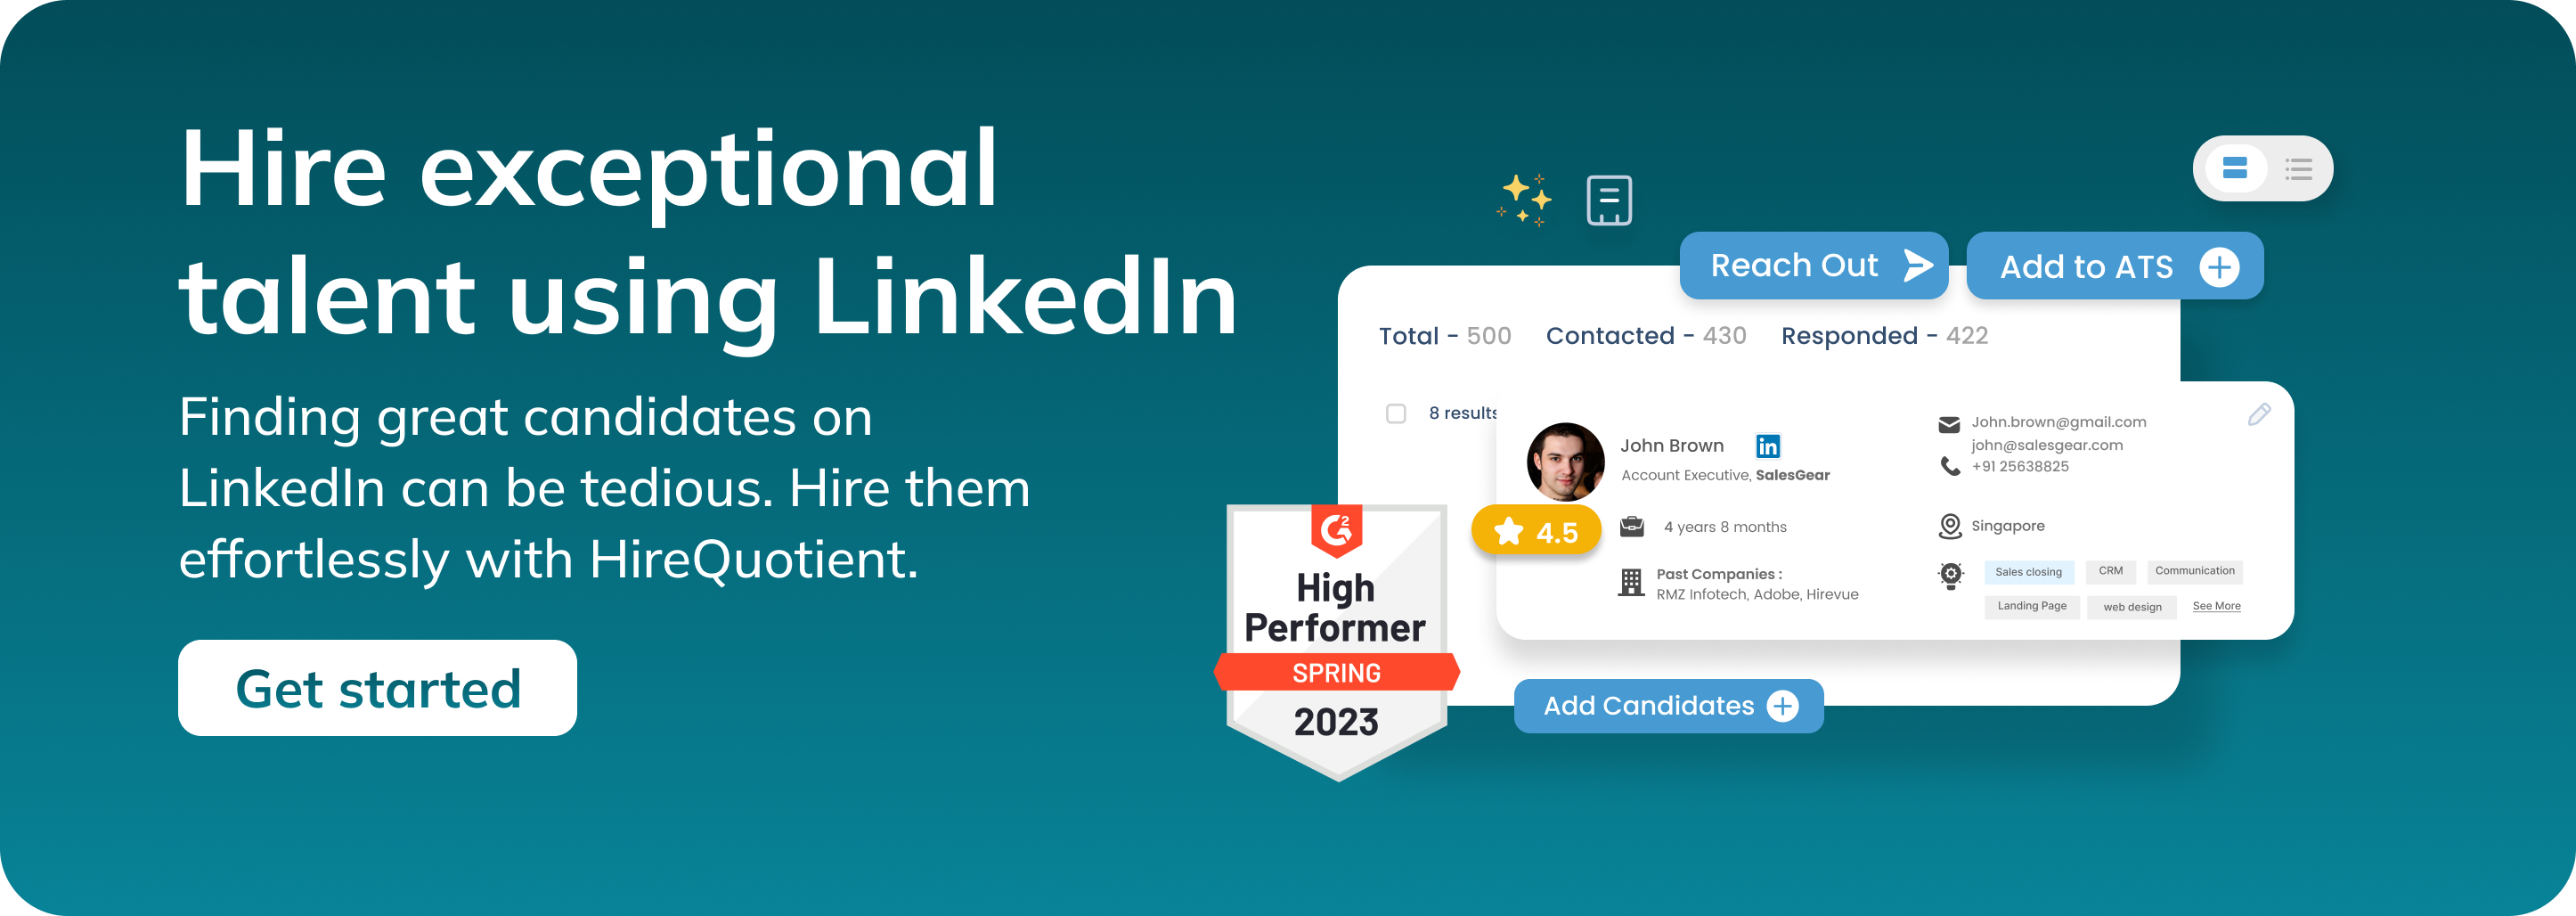 How To Search Resumes On LinkedIn (Hire candidates from Linkedin)).png